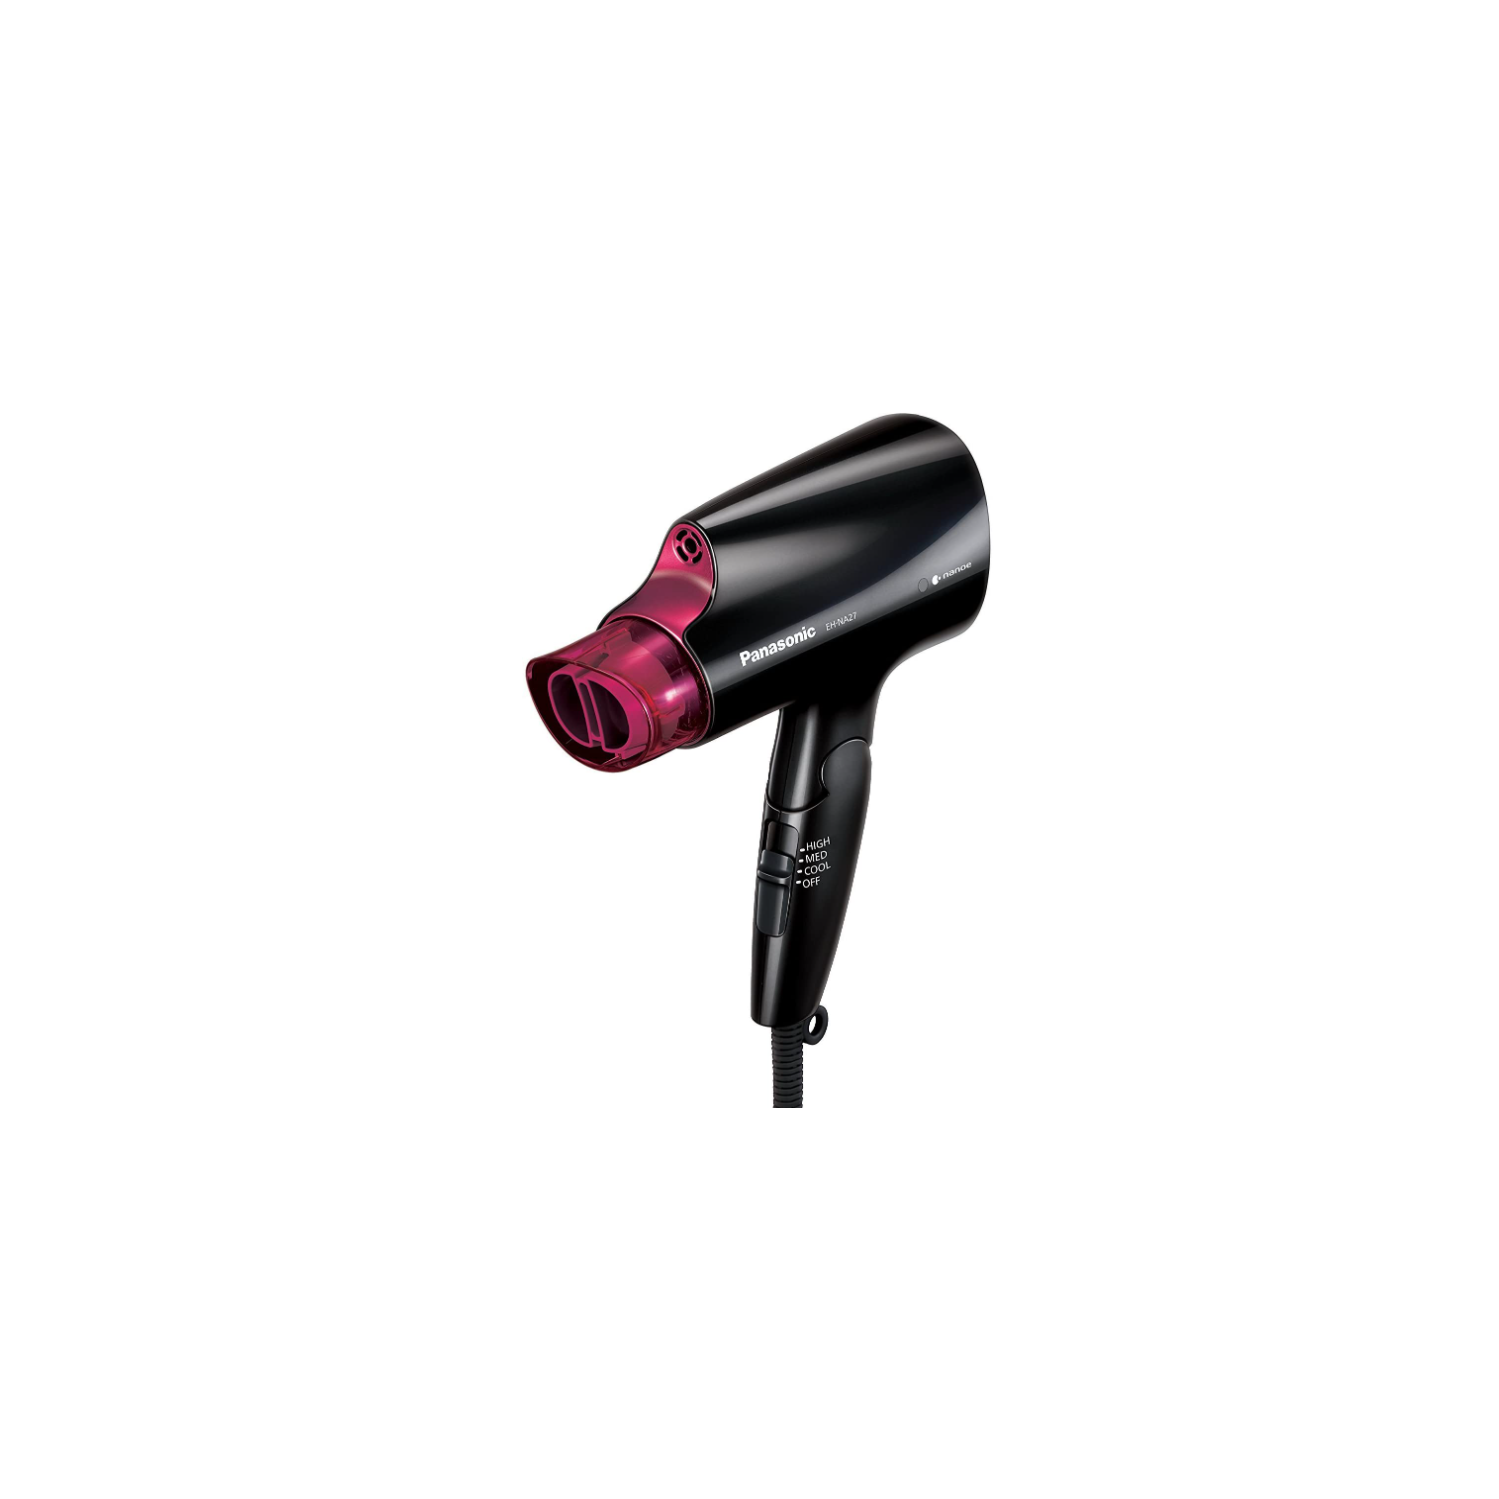 Panasonic Compact Travel Hair Dryer With Nanoe Technology and Quick-Dry Nozzle - Ehna27k, Black & Pink Travel Size, 550 Grams